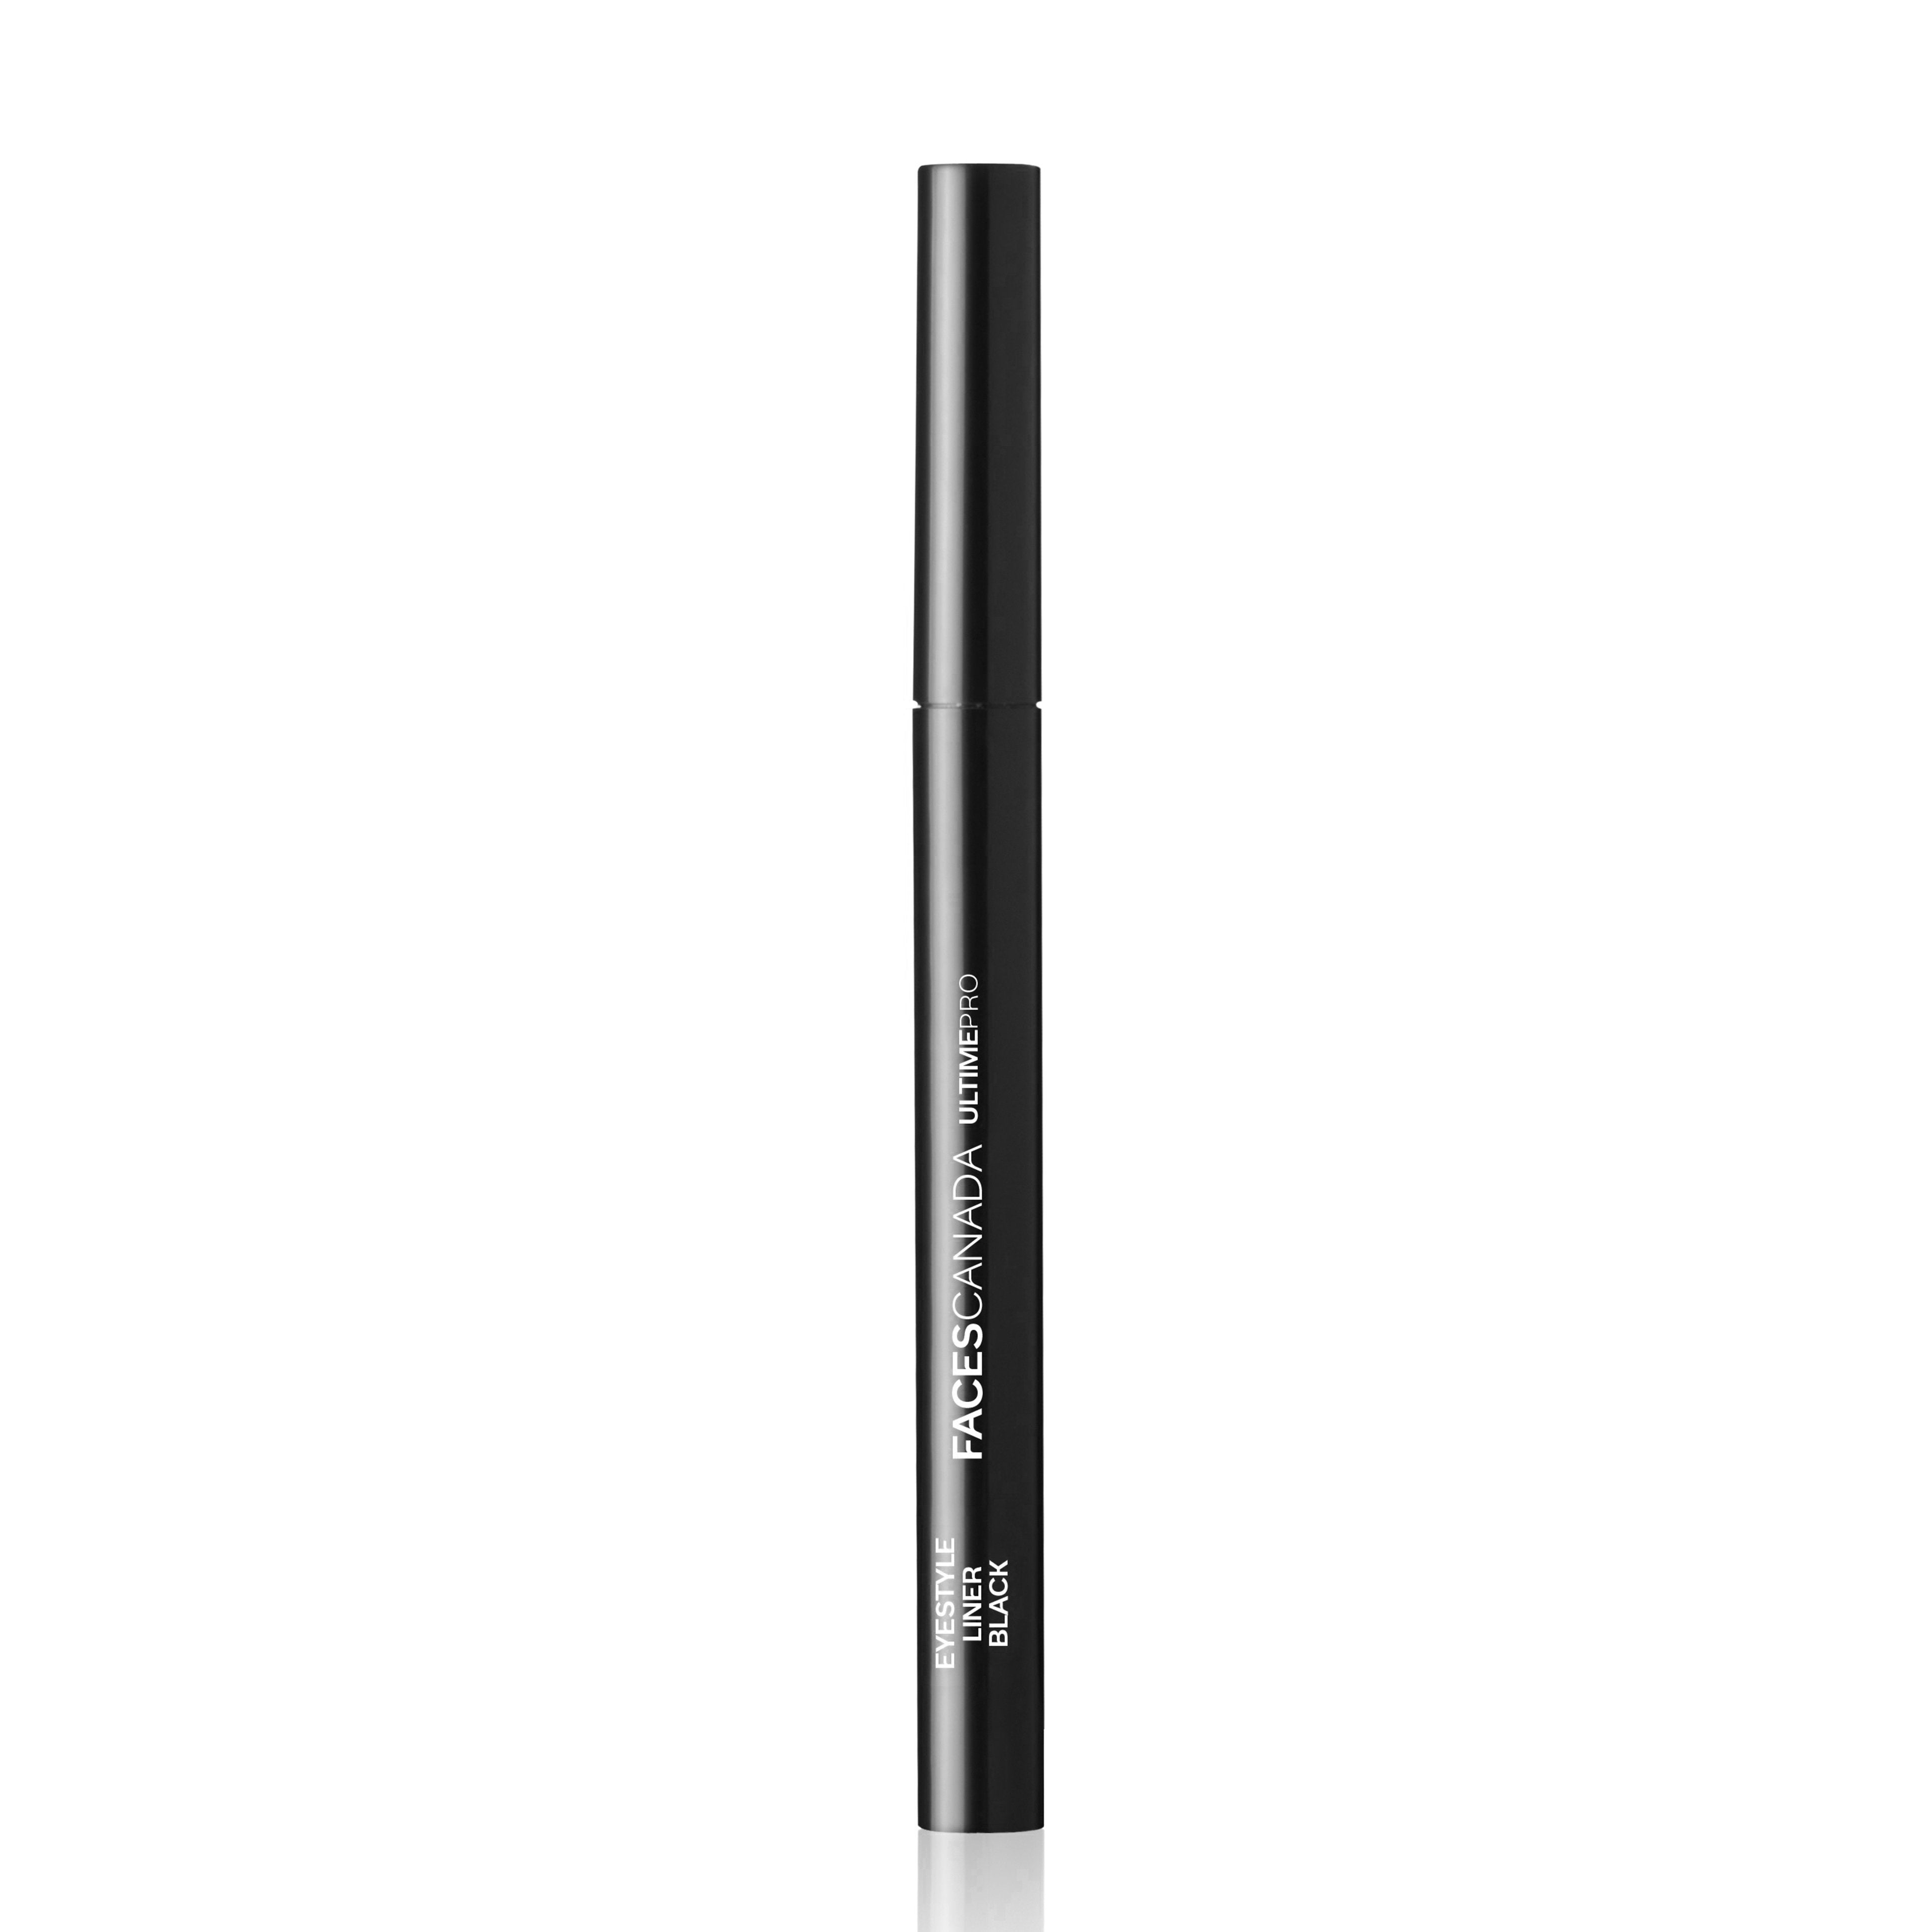 Faces Canada Ultime Pro Eyestyle Liner Black (1 ml) Faces Canada